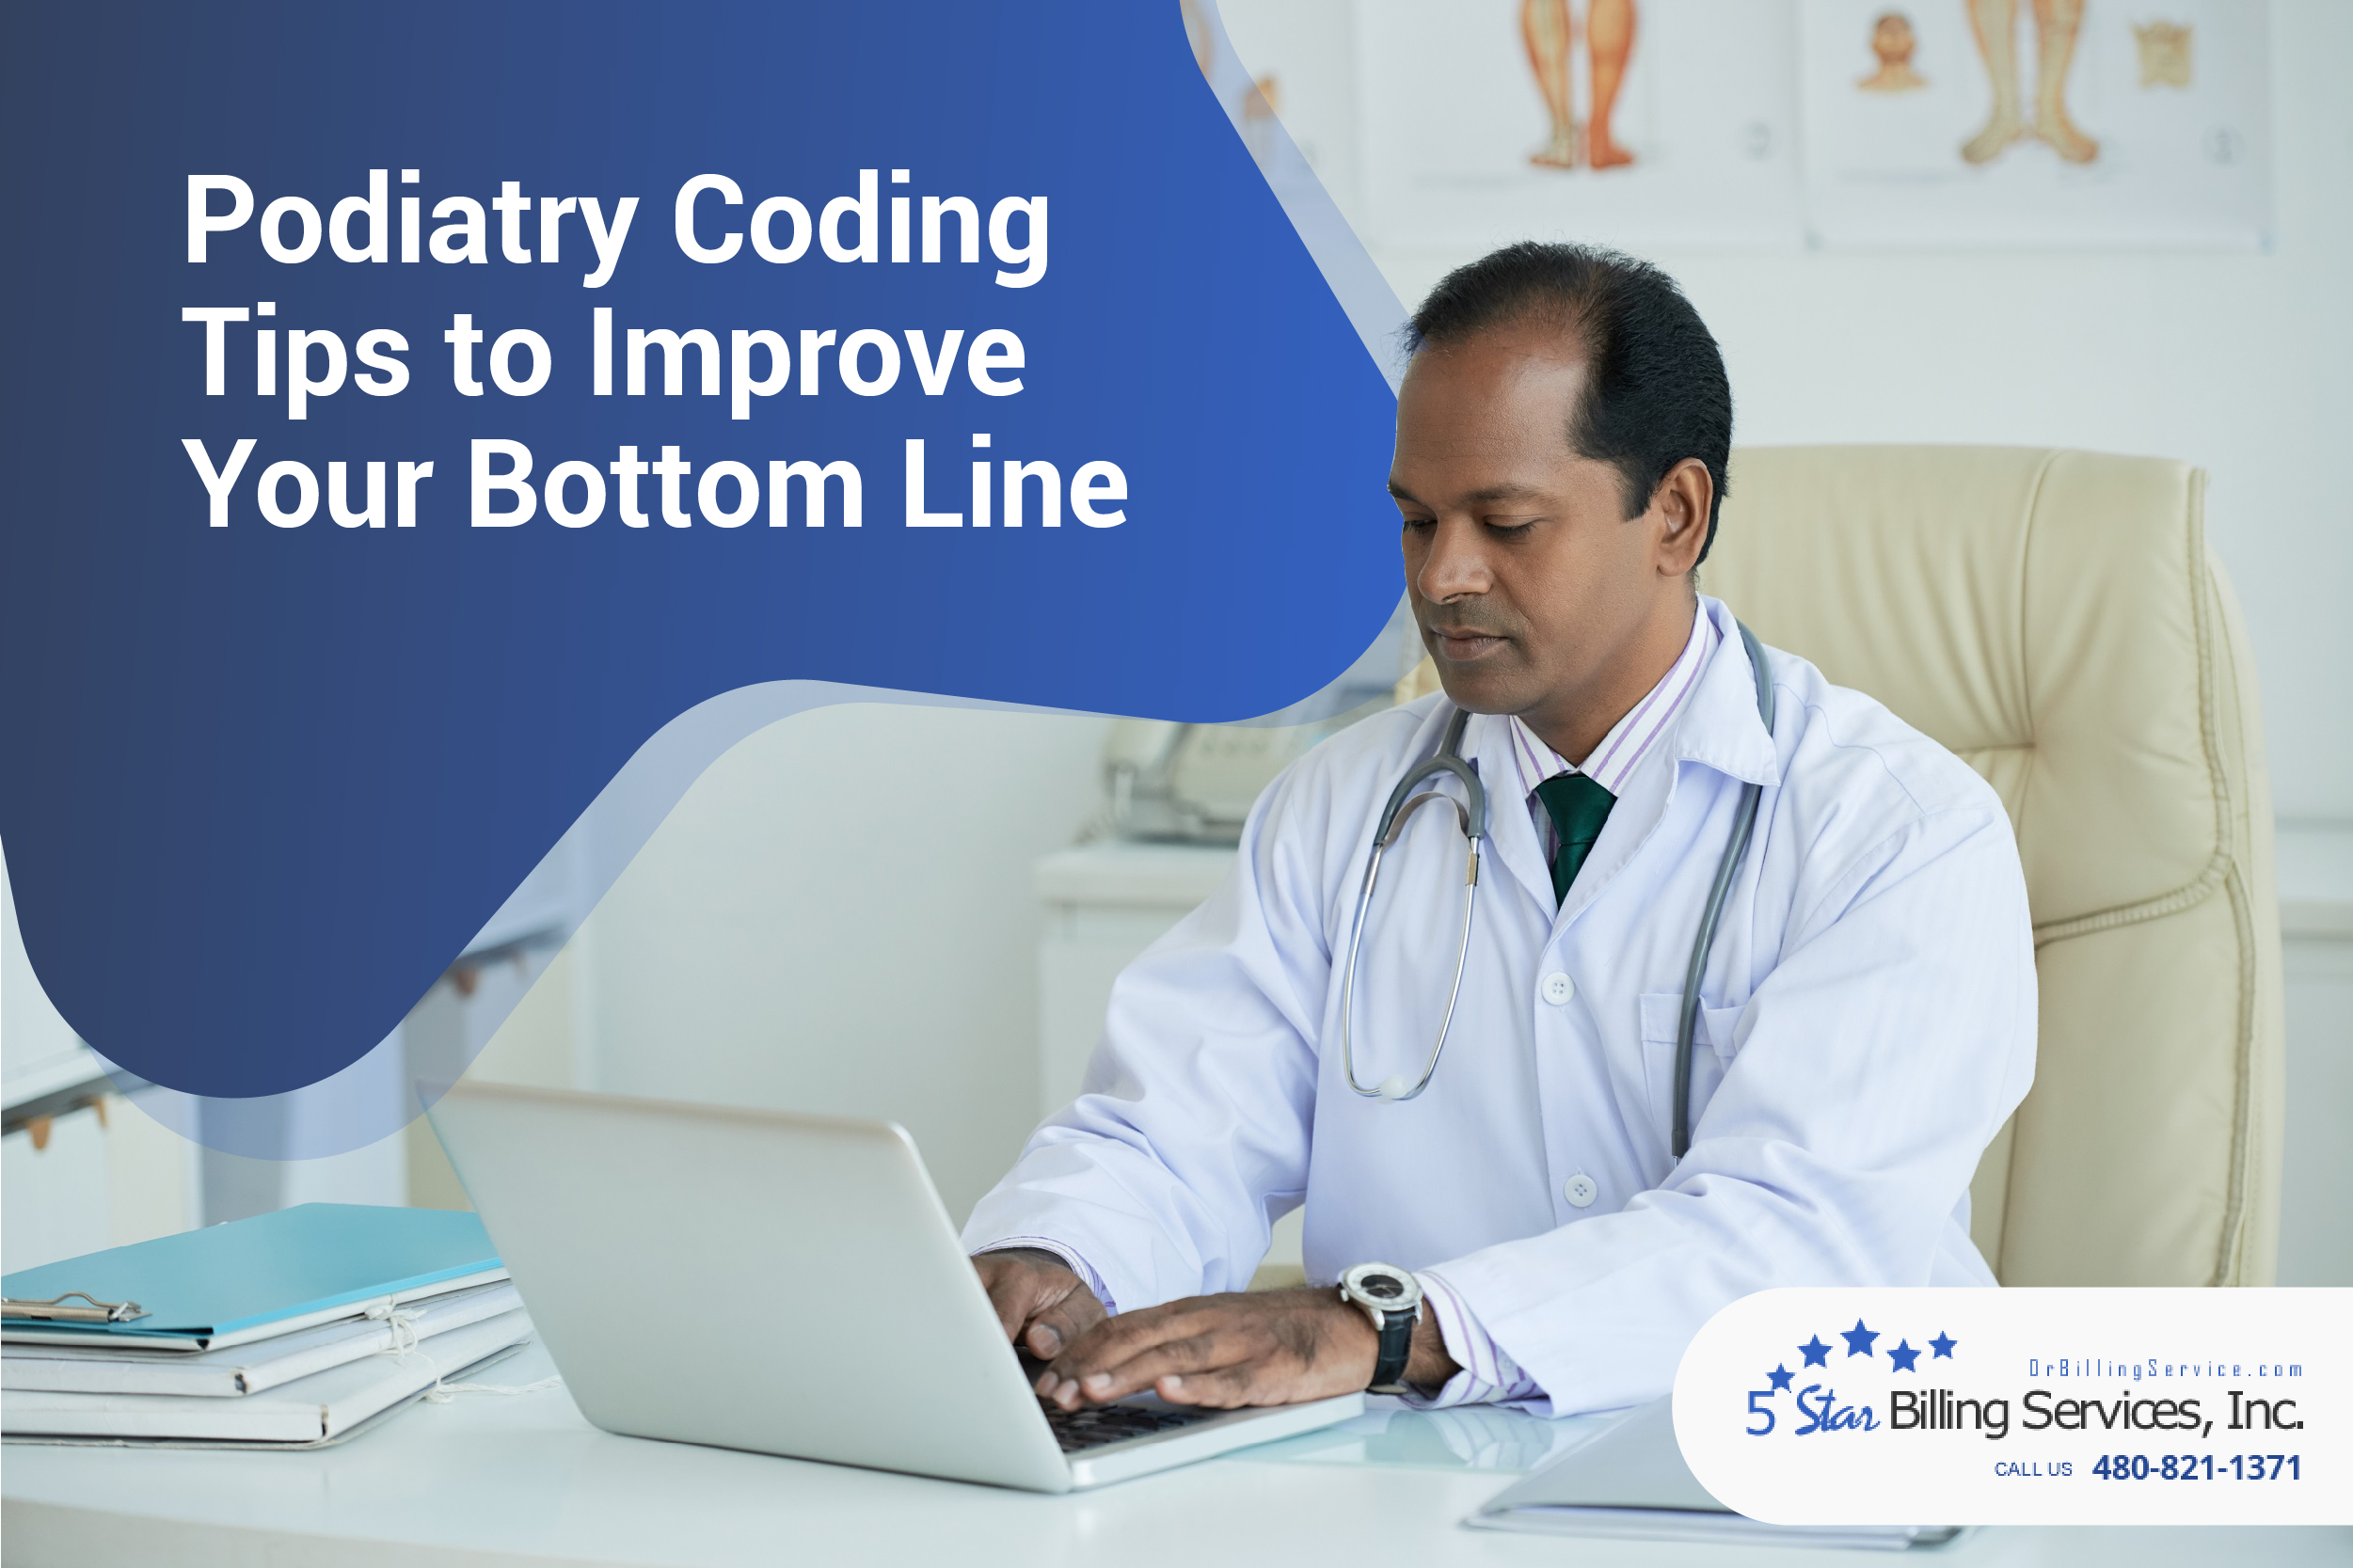 Doctor looking at Podiatry Coding